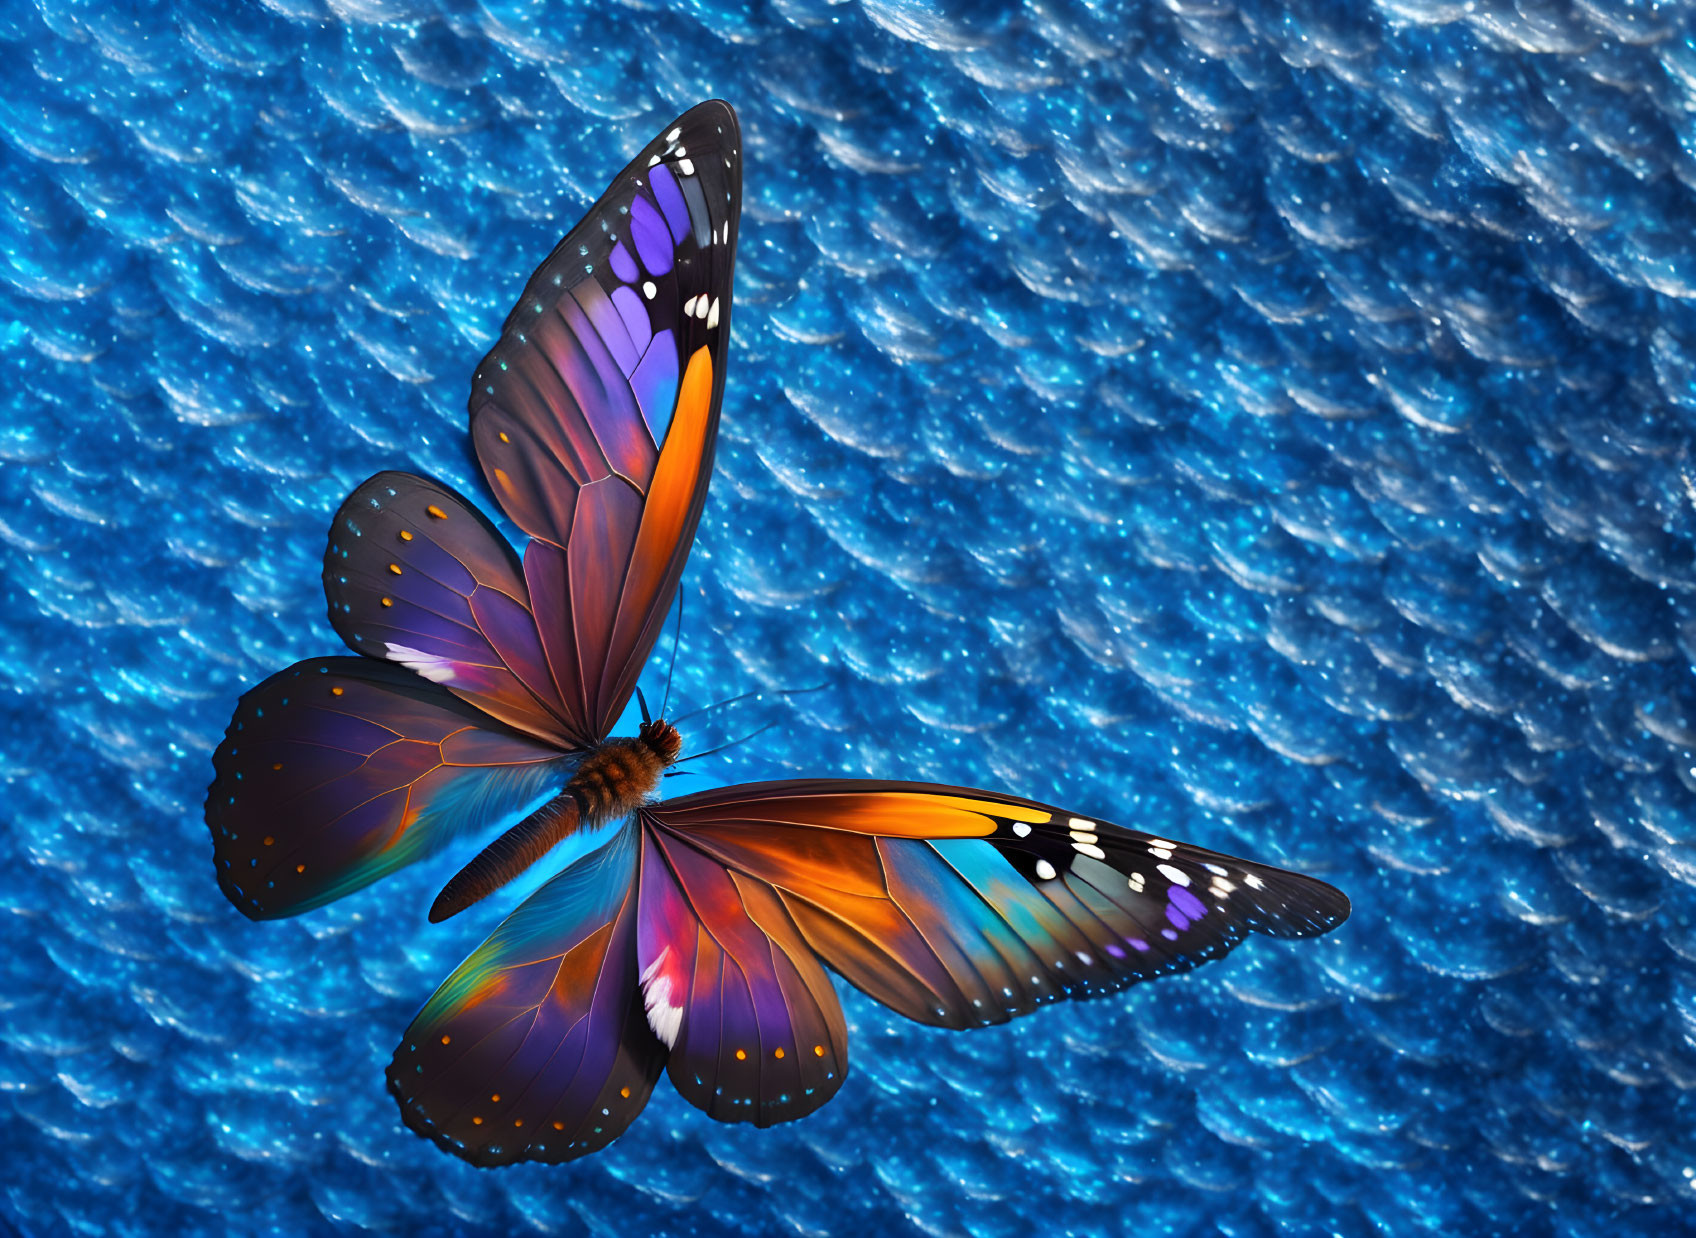 Colorful Digital Butterfly with Orange and Blue Wings on Sparkling Blue Water Background